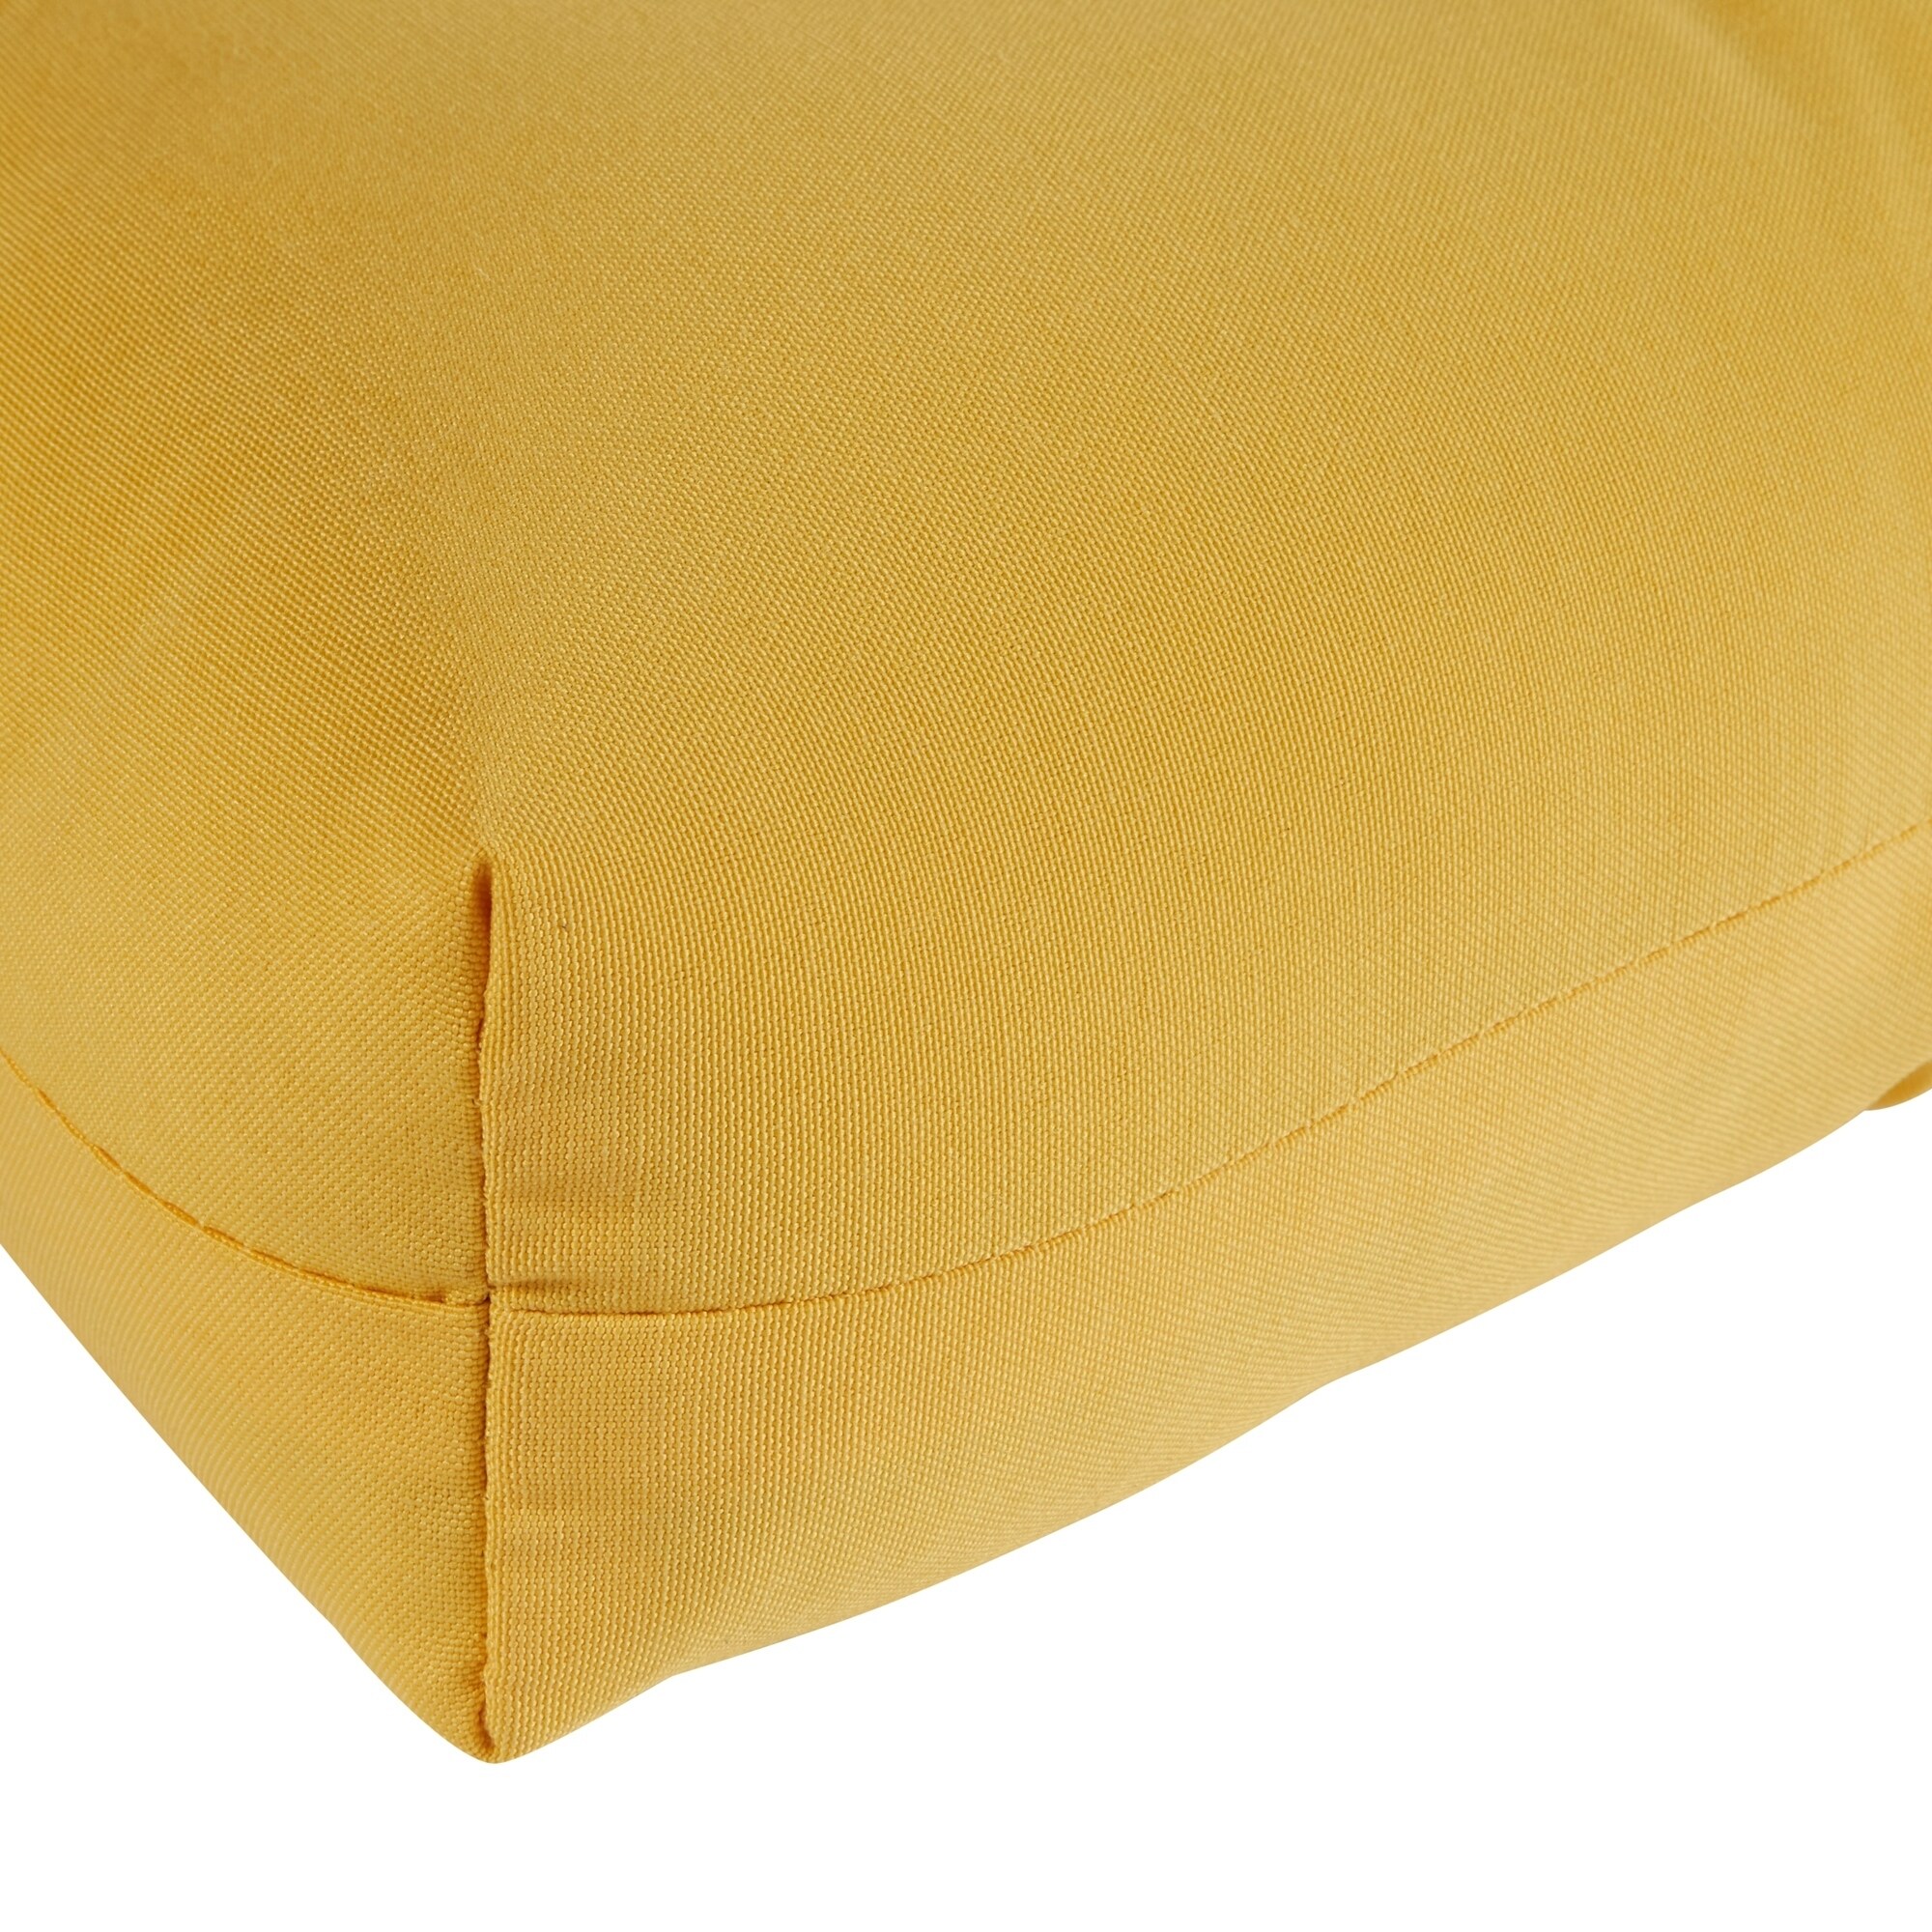 Yellow 72-inch Outdoor Chaise Lounger Cushion by Havenside Home - 22 w x 72 l